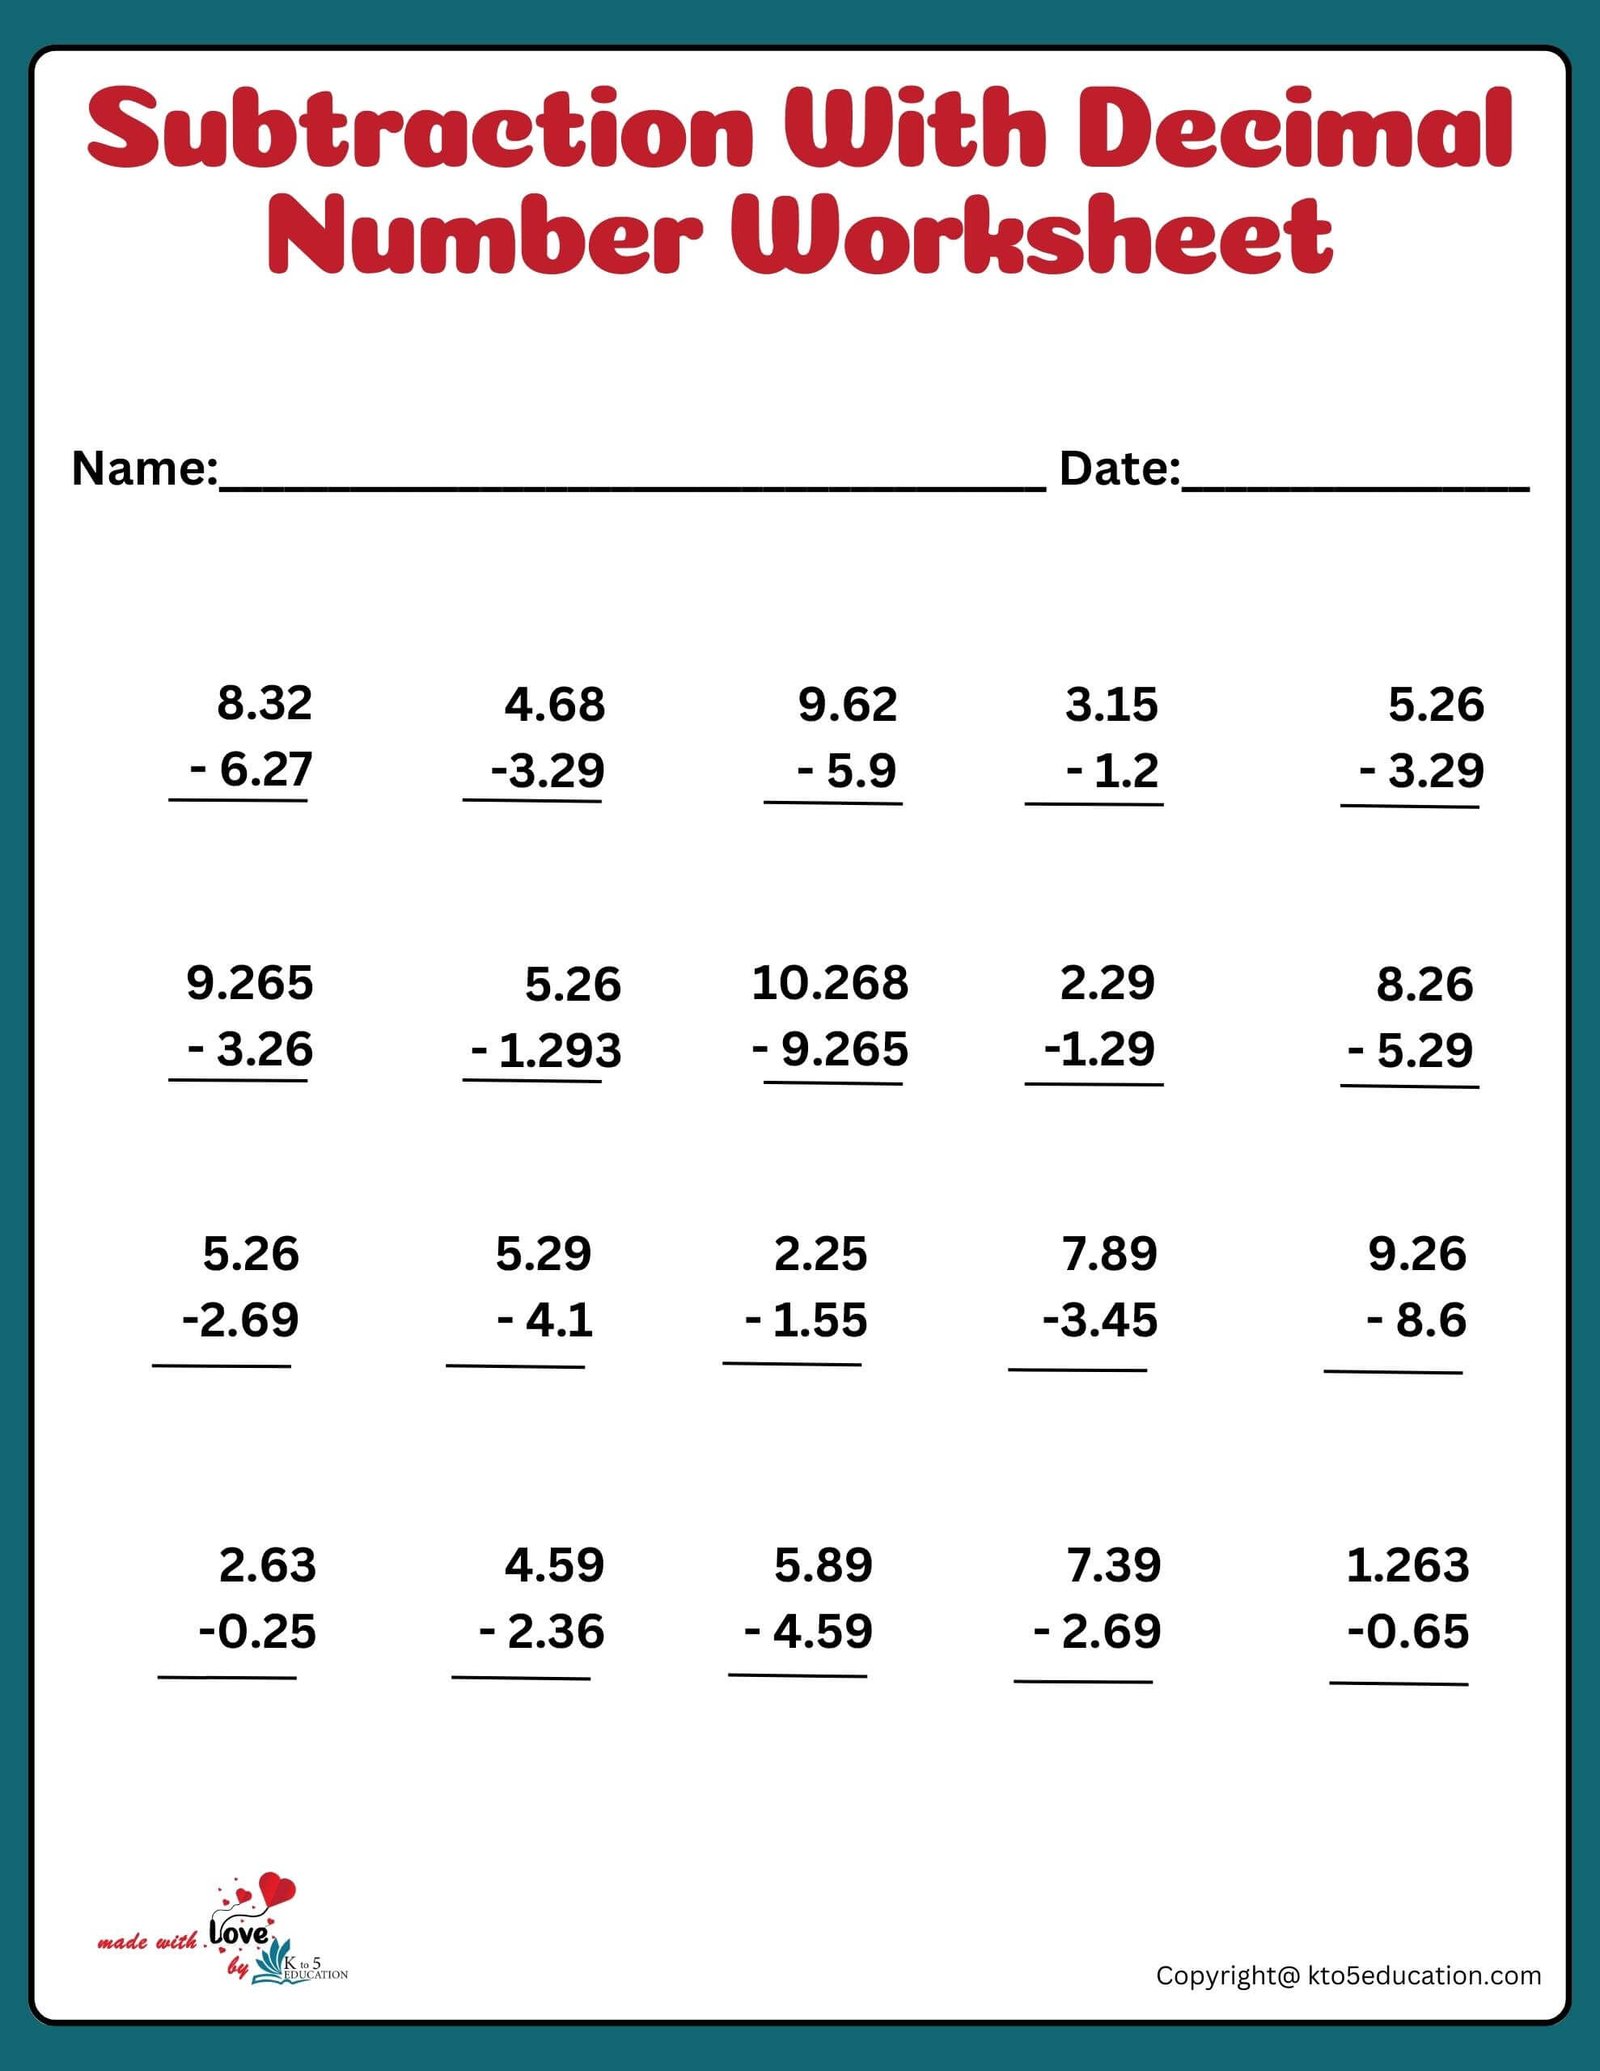 Subtraction With Decimal Nuimber Worksheet